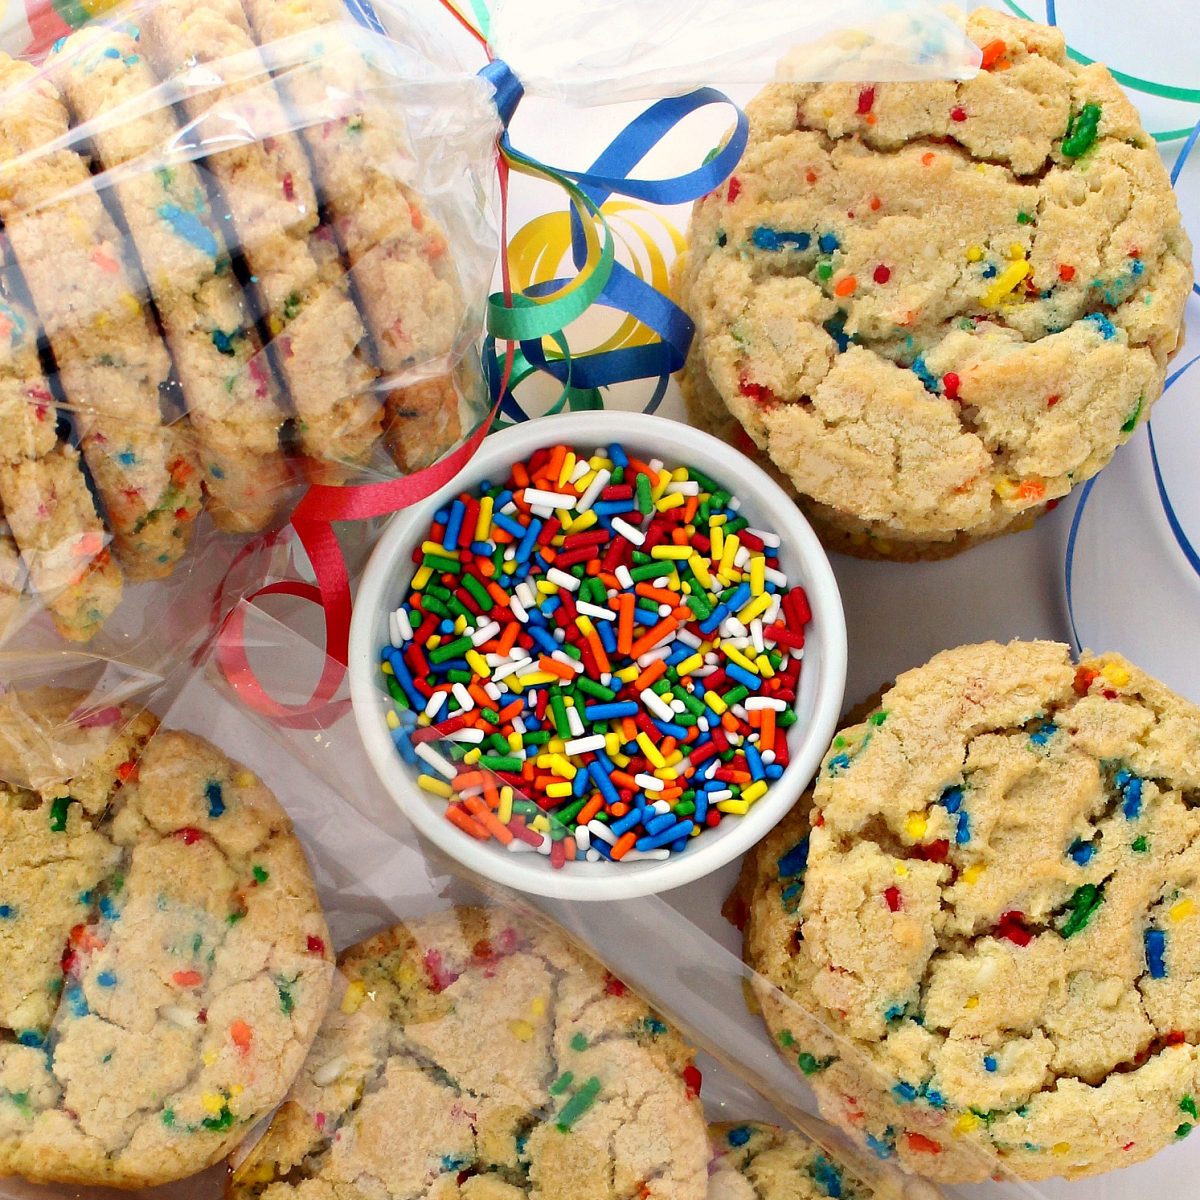 Cookies and a bowl of elongated, rainbow colored jimmies sprinkles.